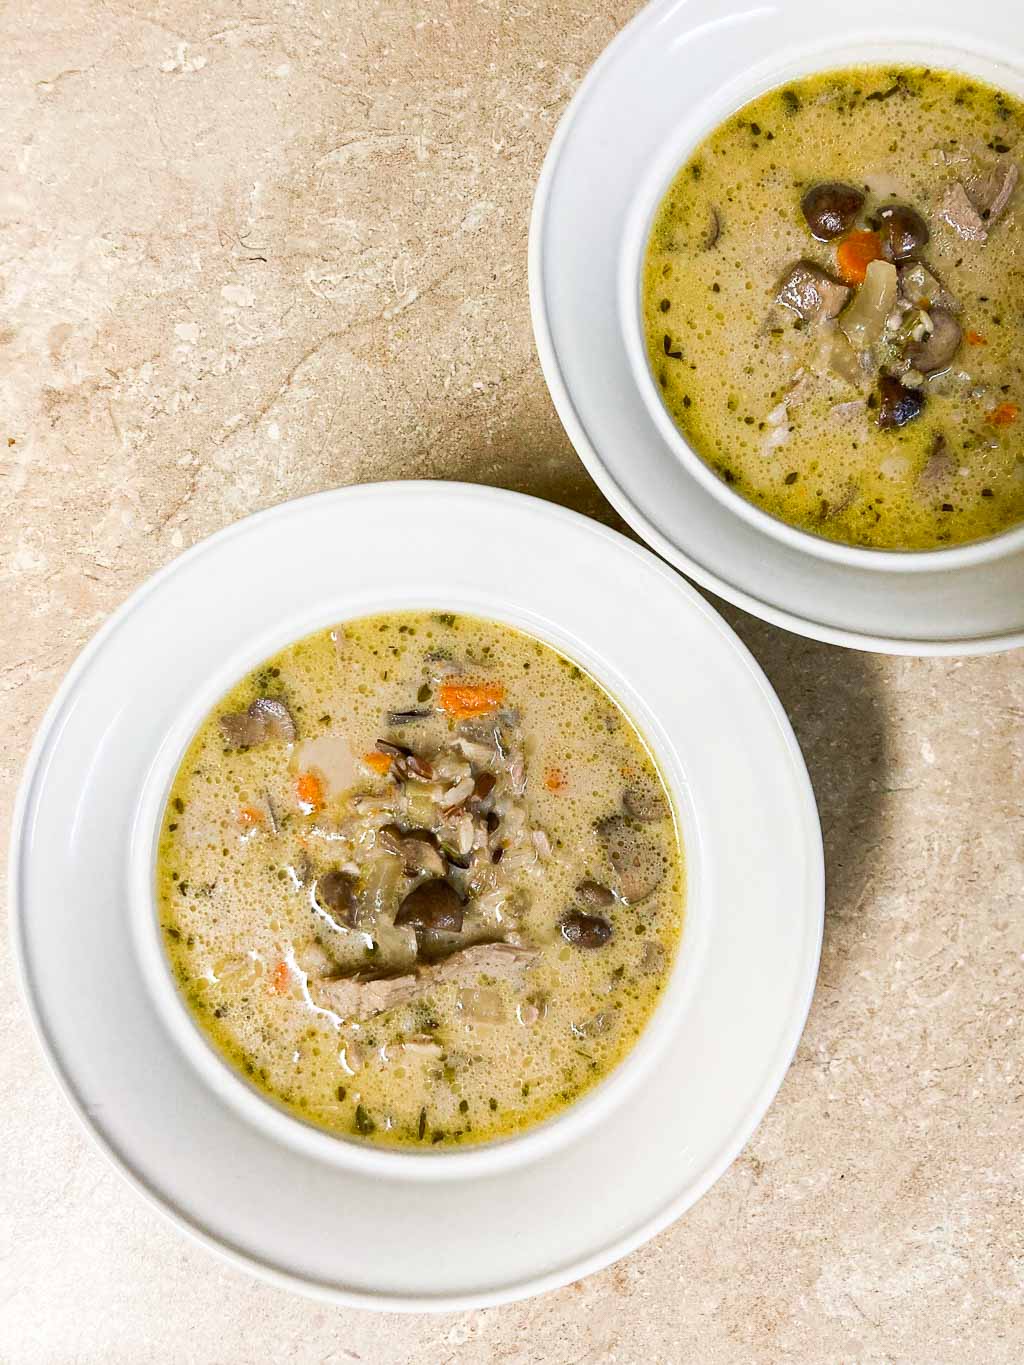 Cream of turkey and wild rice soup recipe inspired by Voyageurs National Park